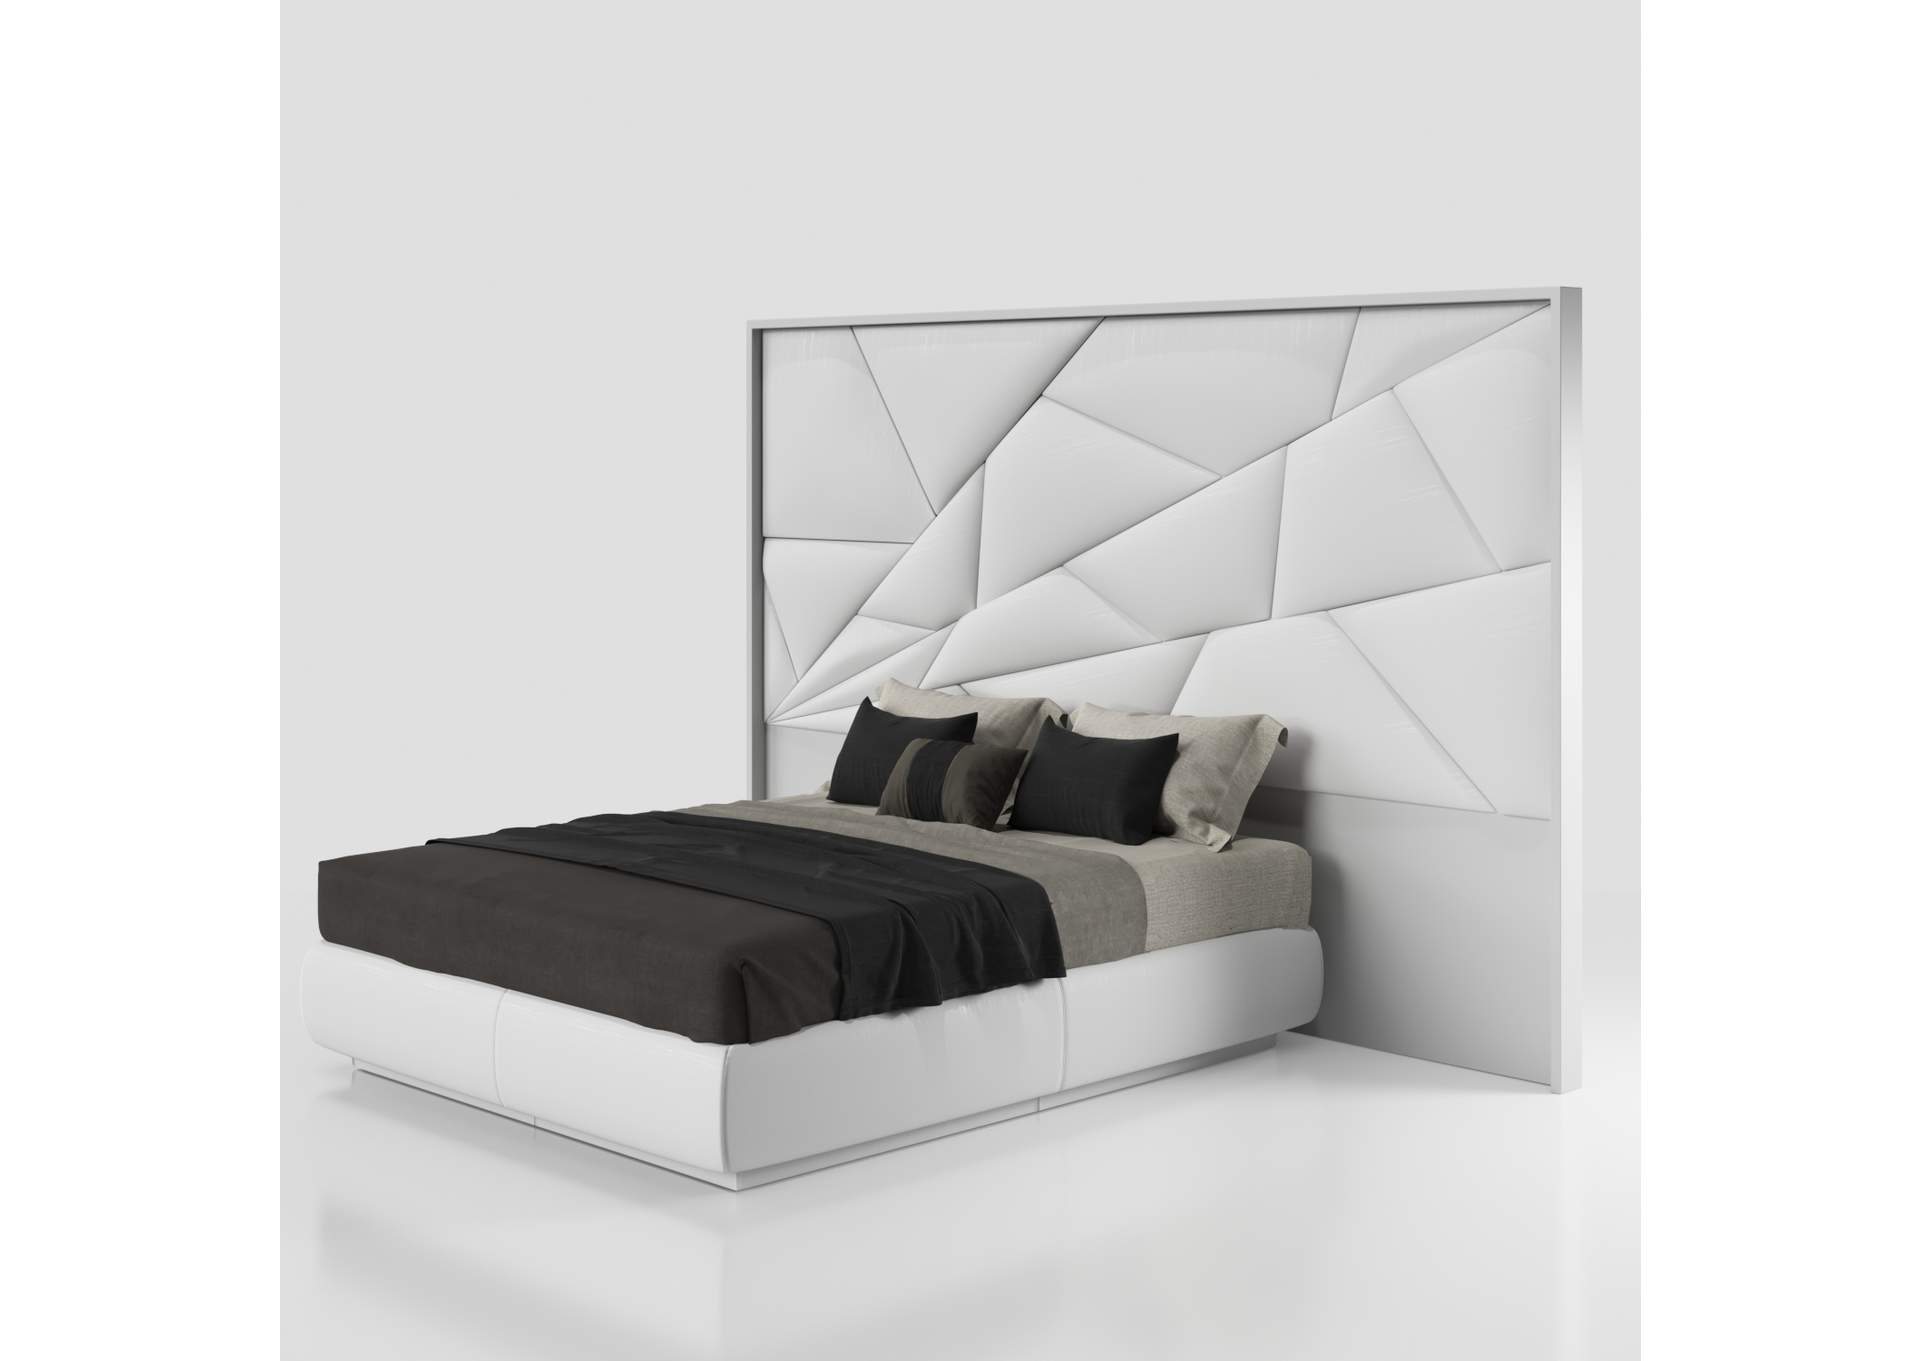 Majesty Bedroom with Light And Kiu Cases SET,ESF Wholesale Furniture